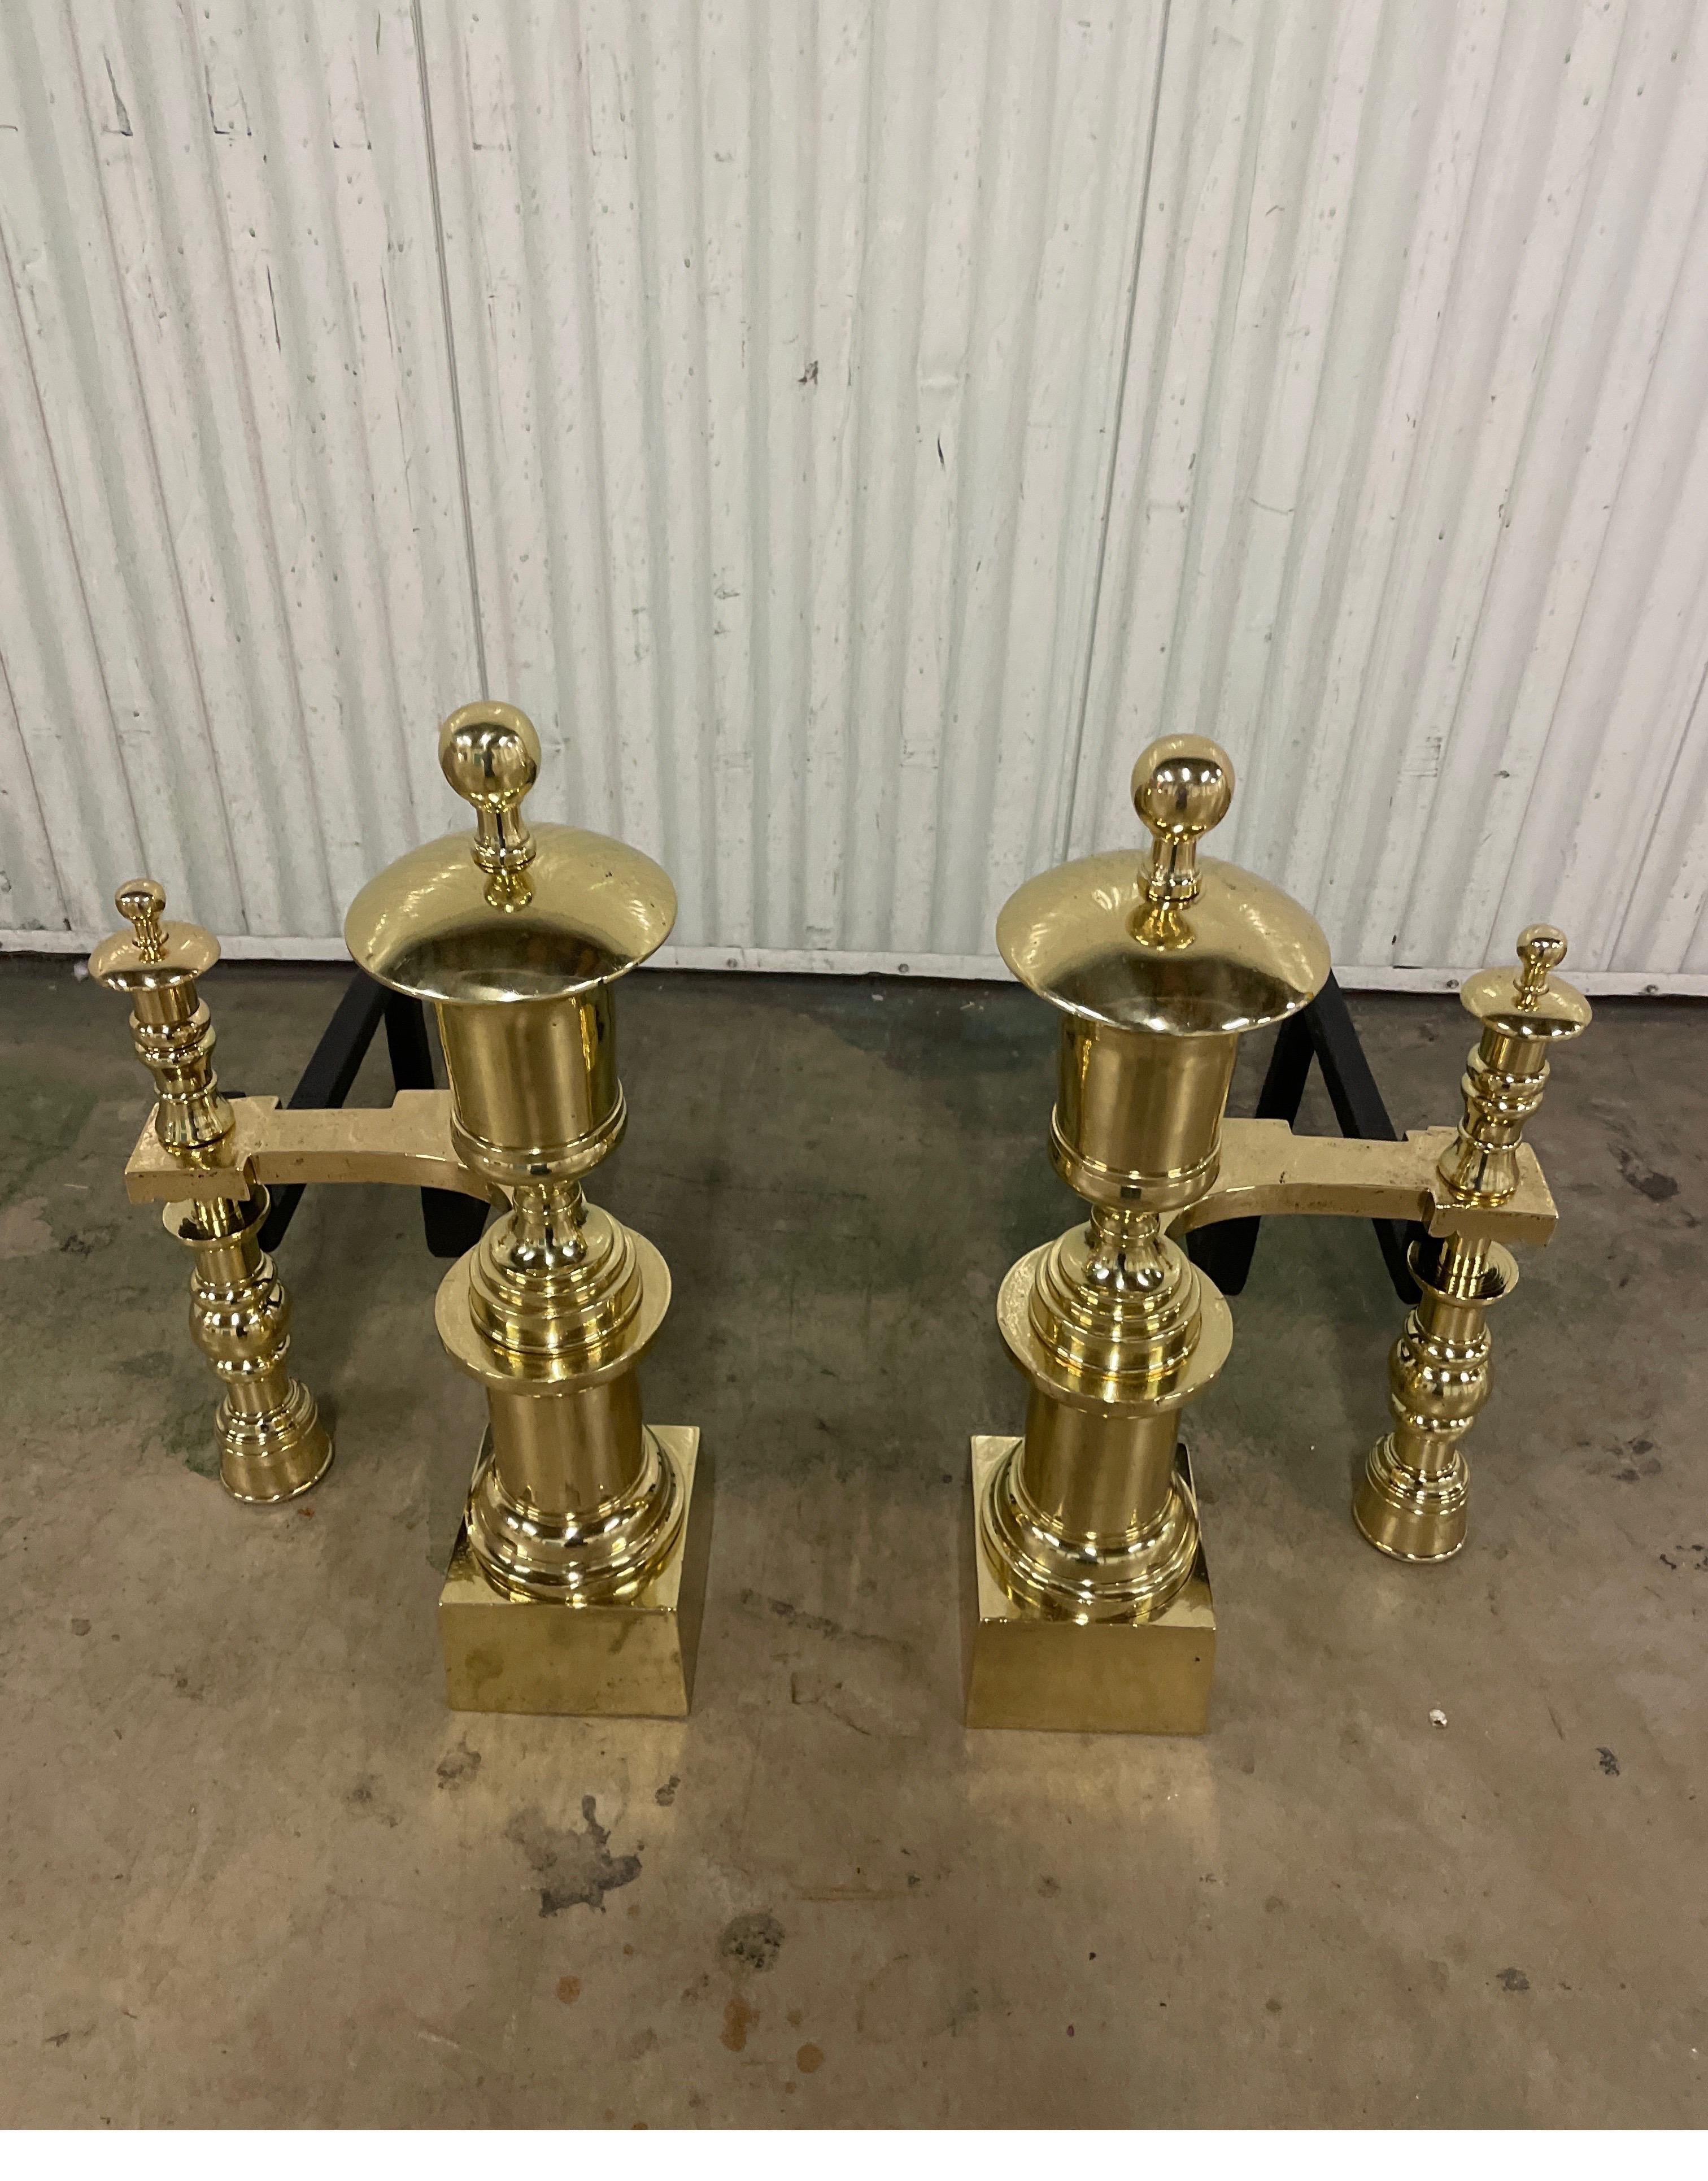 Outstanding pair of antique solid brass andirons. Very imposing solid brass Neoclassical andirons which will make any fireplace standout.